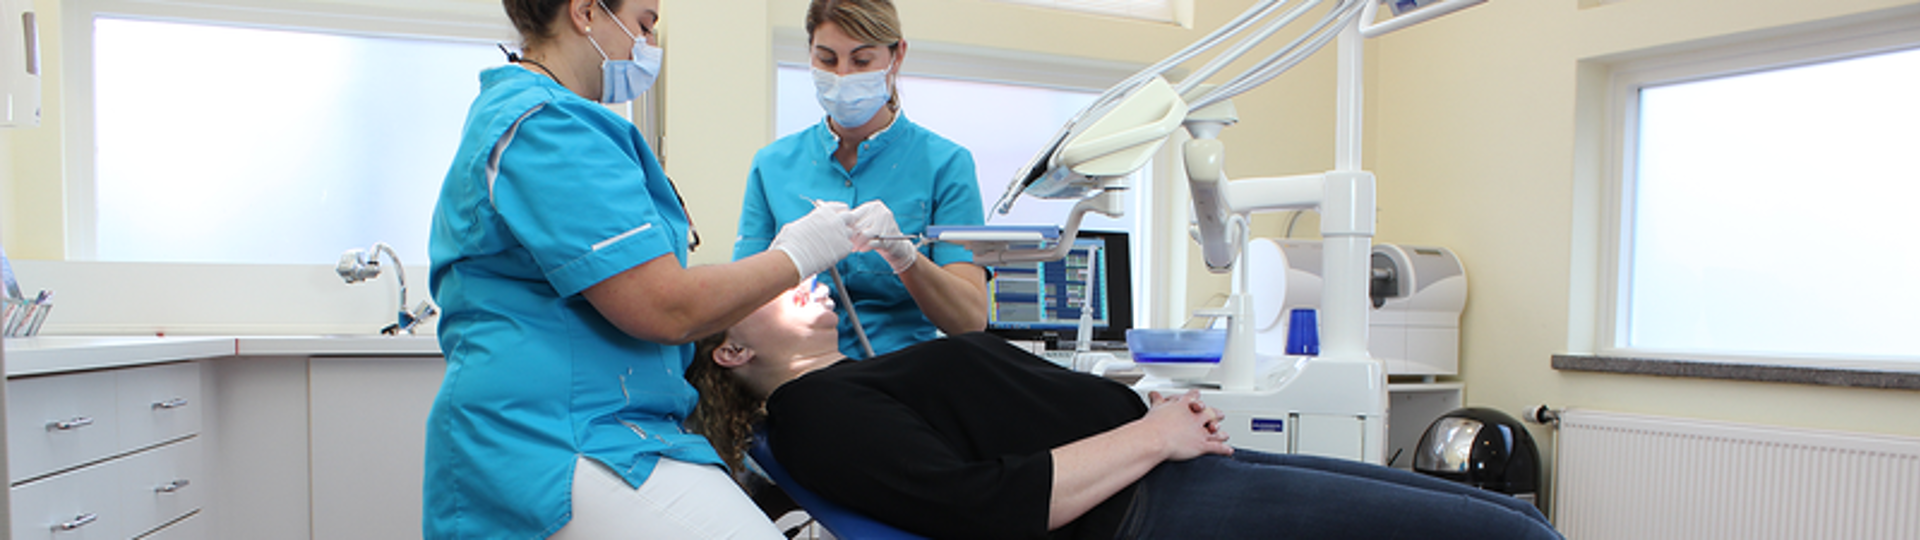 6 ergonomic chairs for dentists and dental hygienists